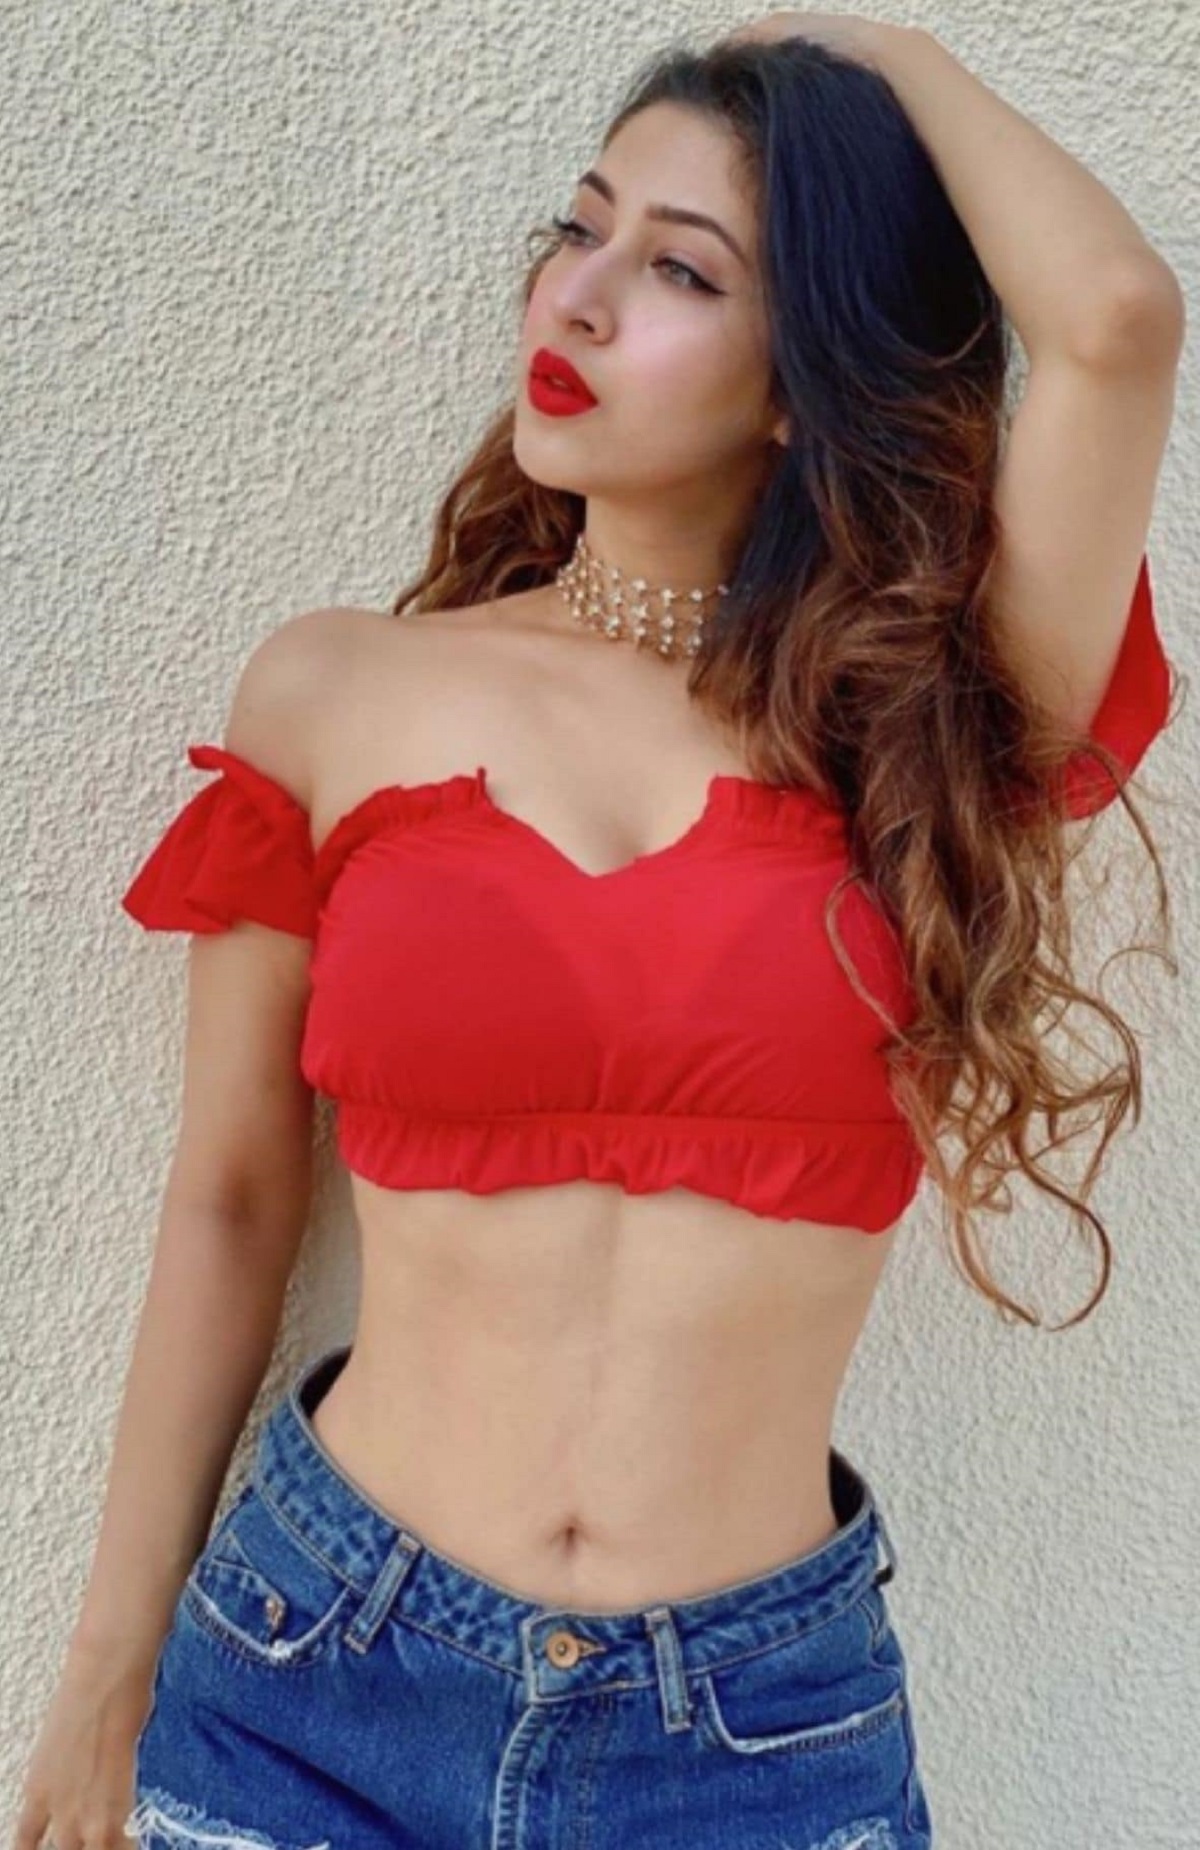 BollyWood: User comments on actress Sonarika's loose jeans 